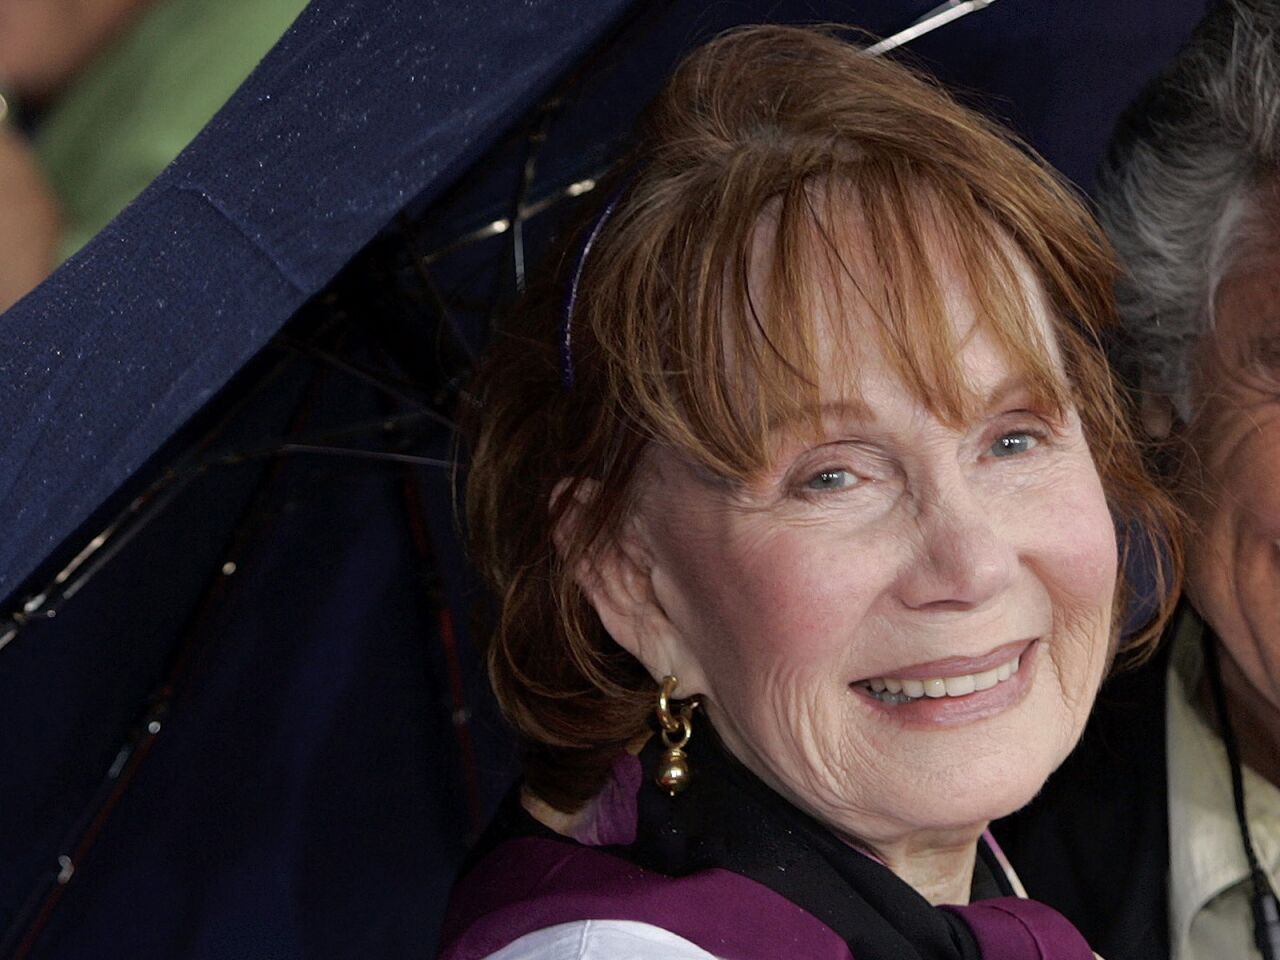 Sitcom star Katherine Helmond had memorable roles as ditzy matriarchs in “Soap,” “Who’s the Boss?” and “Coach.” Her work as Jessica Tate on the 1970s parody "Soap" earned her seven Emmy nominations, and she was nominated again in 2002 for her guest role in “Everybody Loves Raymond.” Helmond also starred in director Terry Gilliam’s films “Brazil” and “Time Bandits.” She was 89.